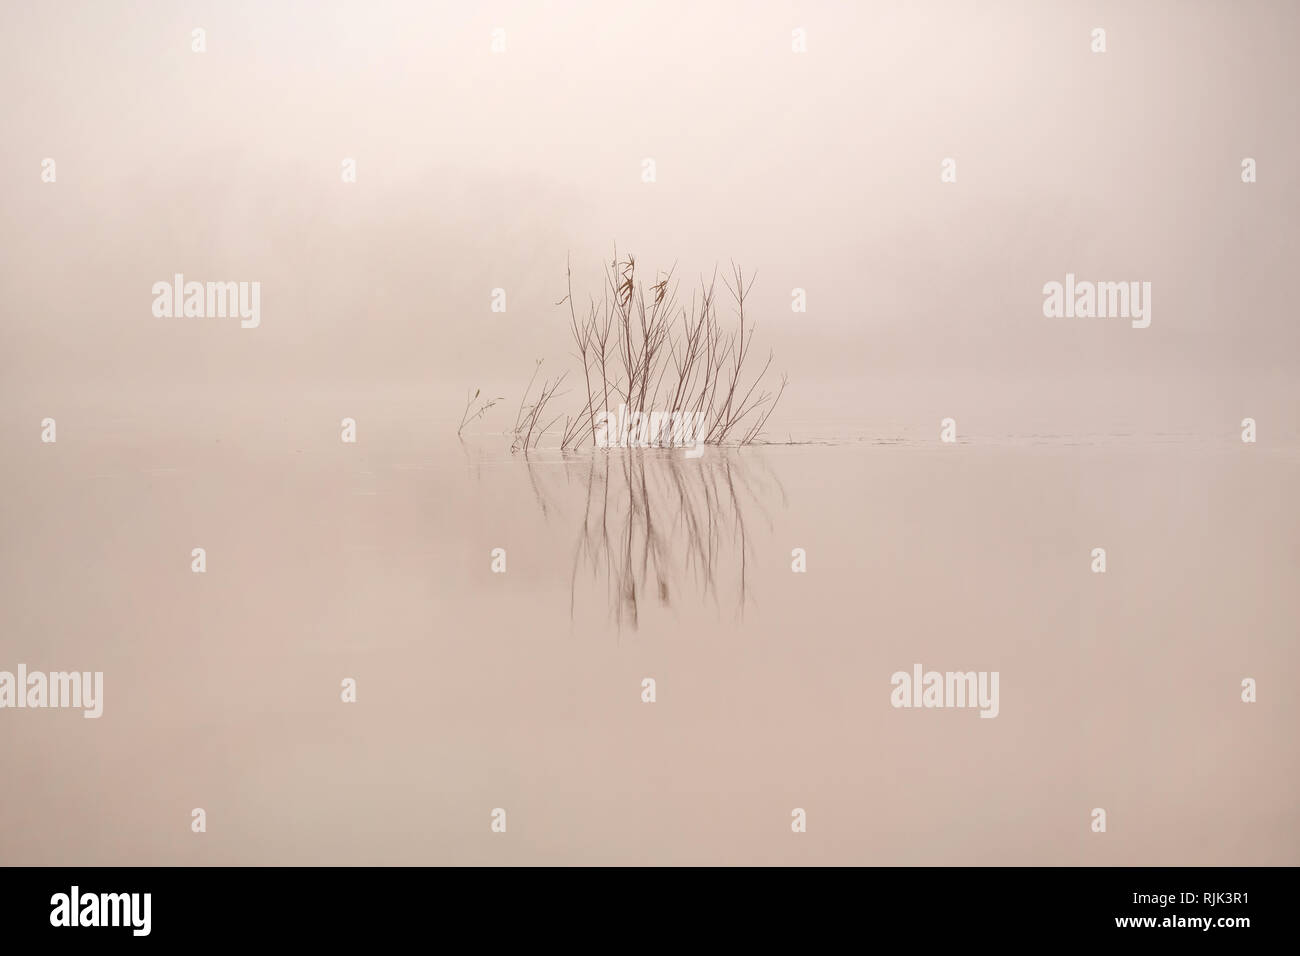 Plant in a foggy lake with a tranquil and melancholic mood Stock Photo